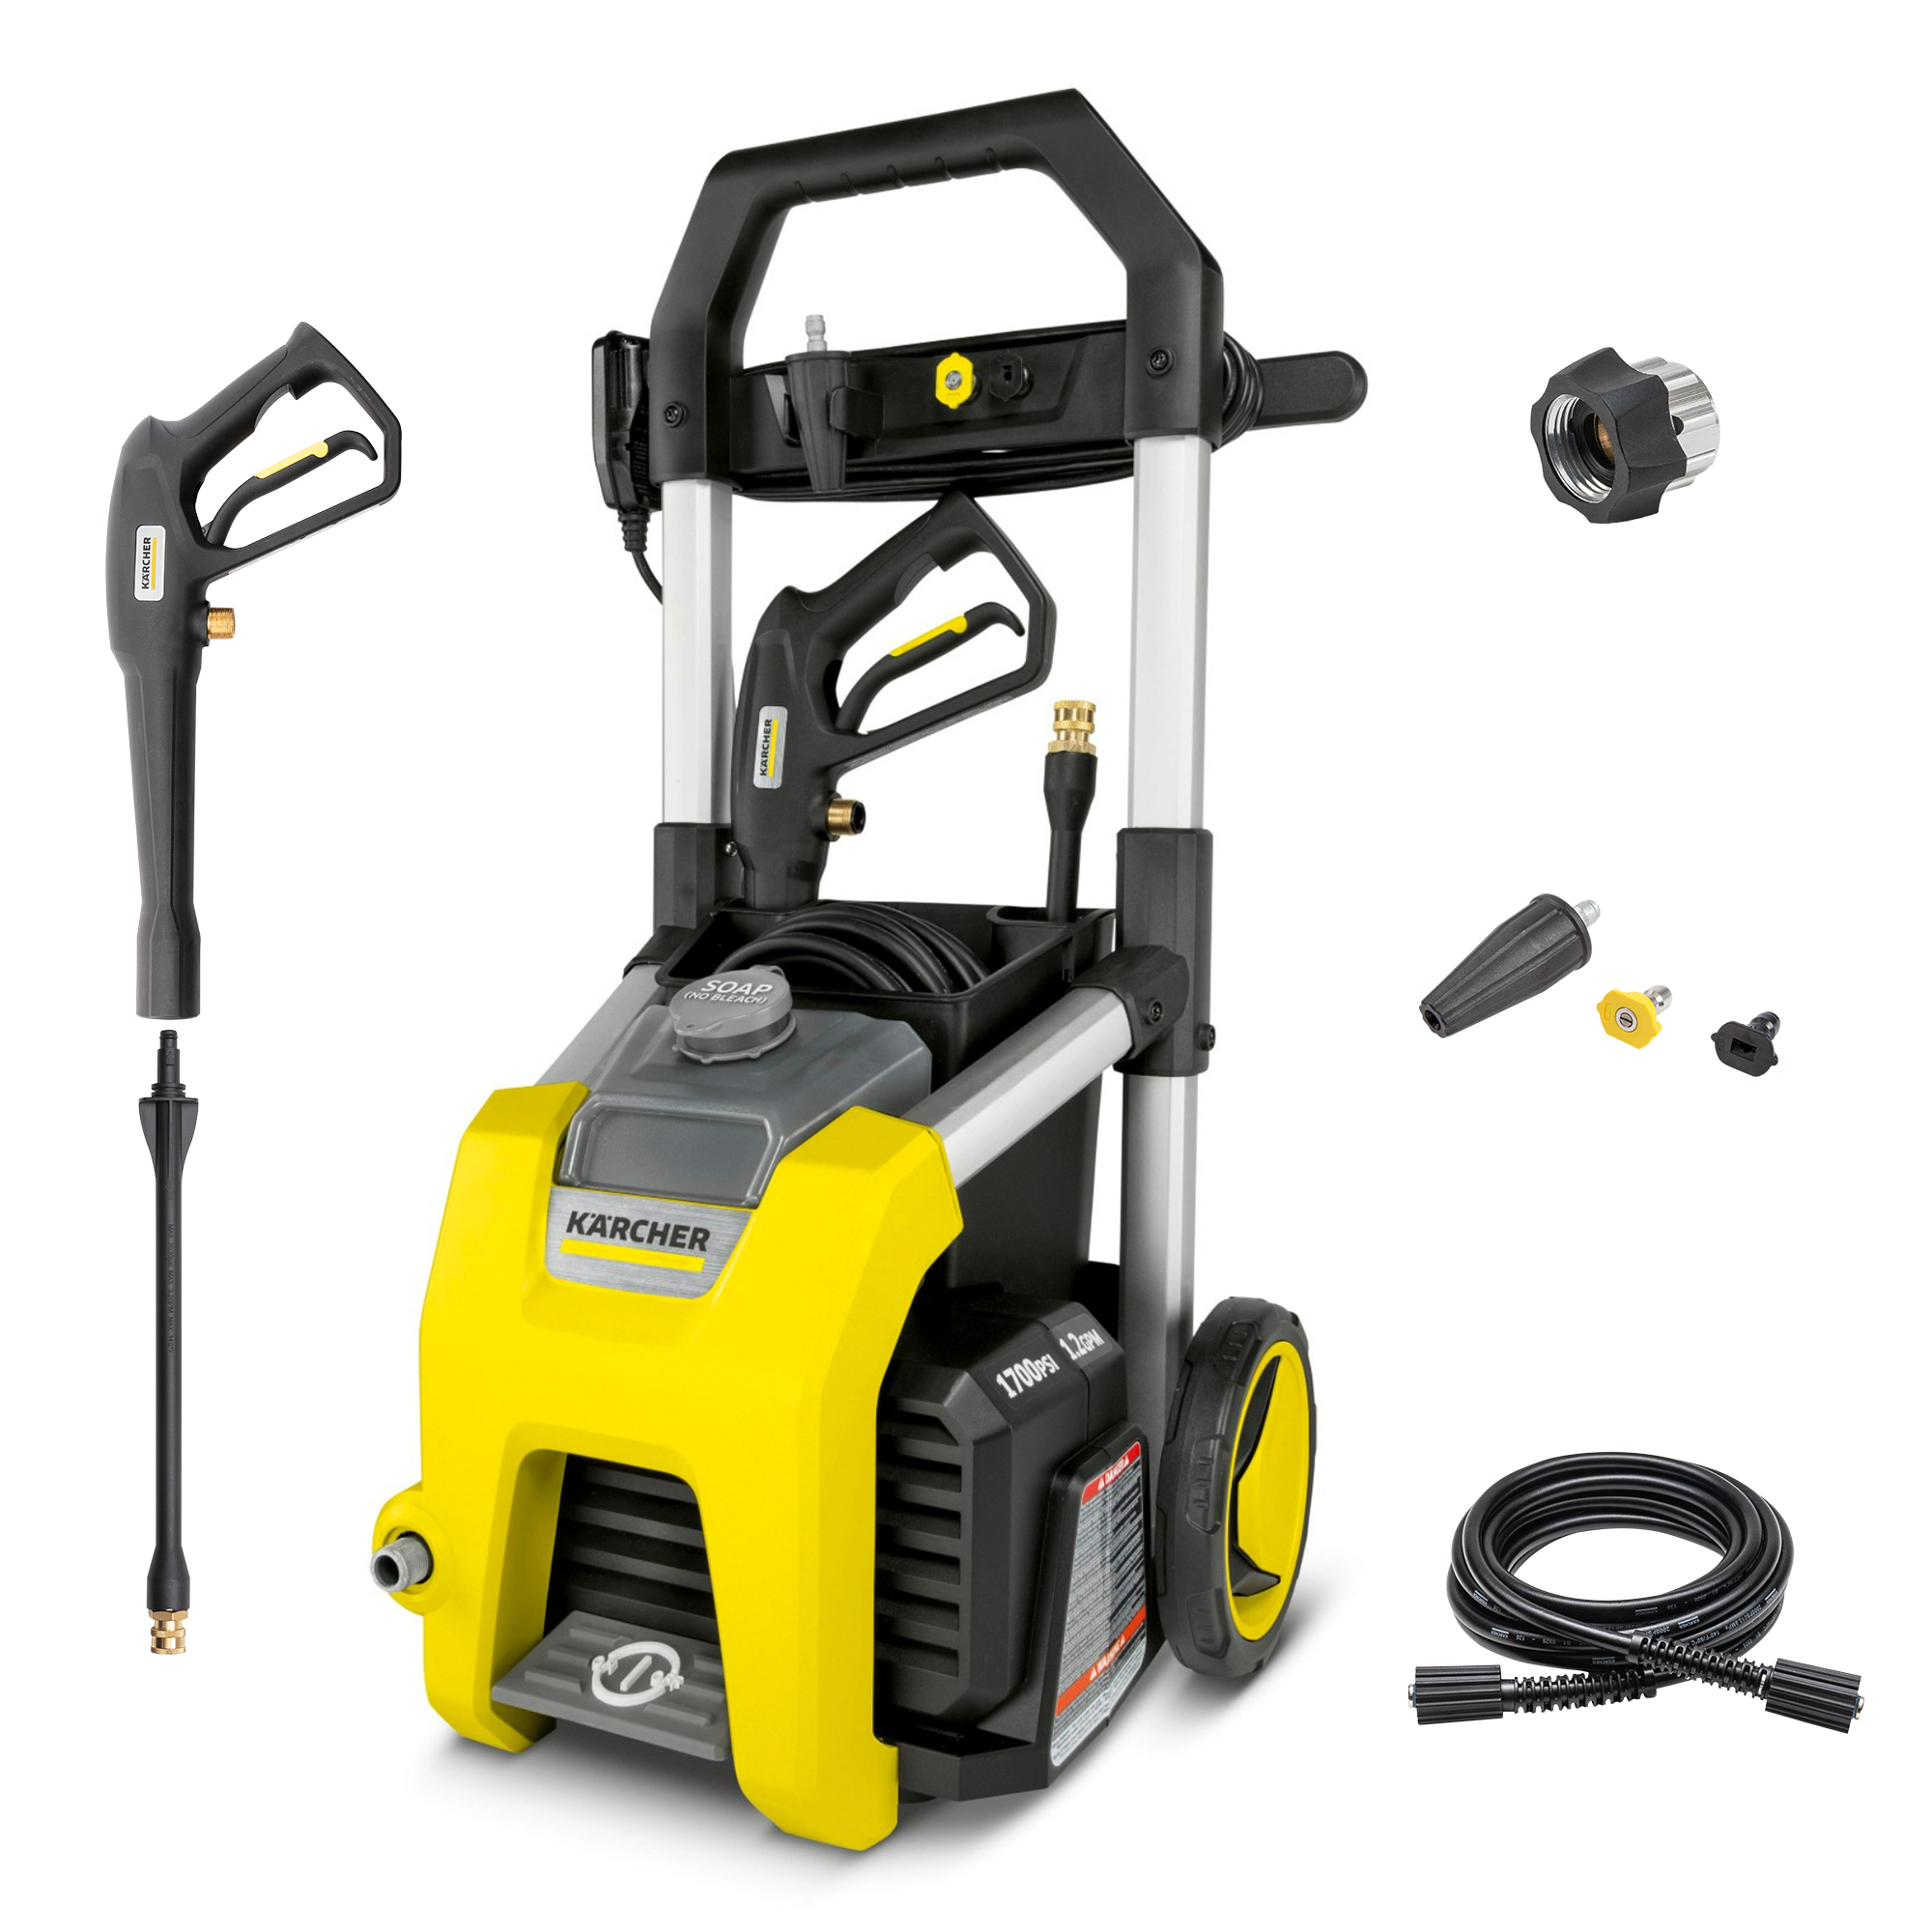 Karcher K1700 2125 PSI Max, Electric Pressure Washer with Hose and 3 Nozzles, 1.2 GPM, Power Washer - image 1 of 9